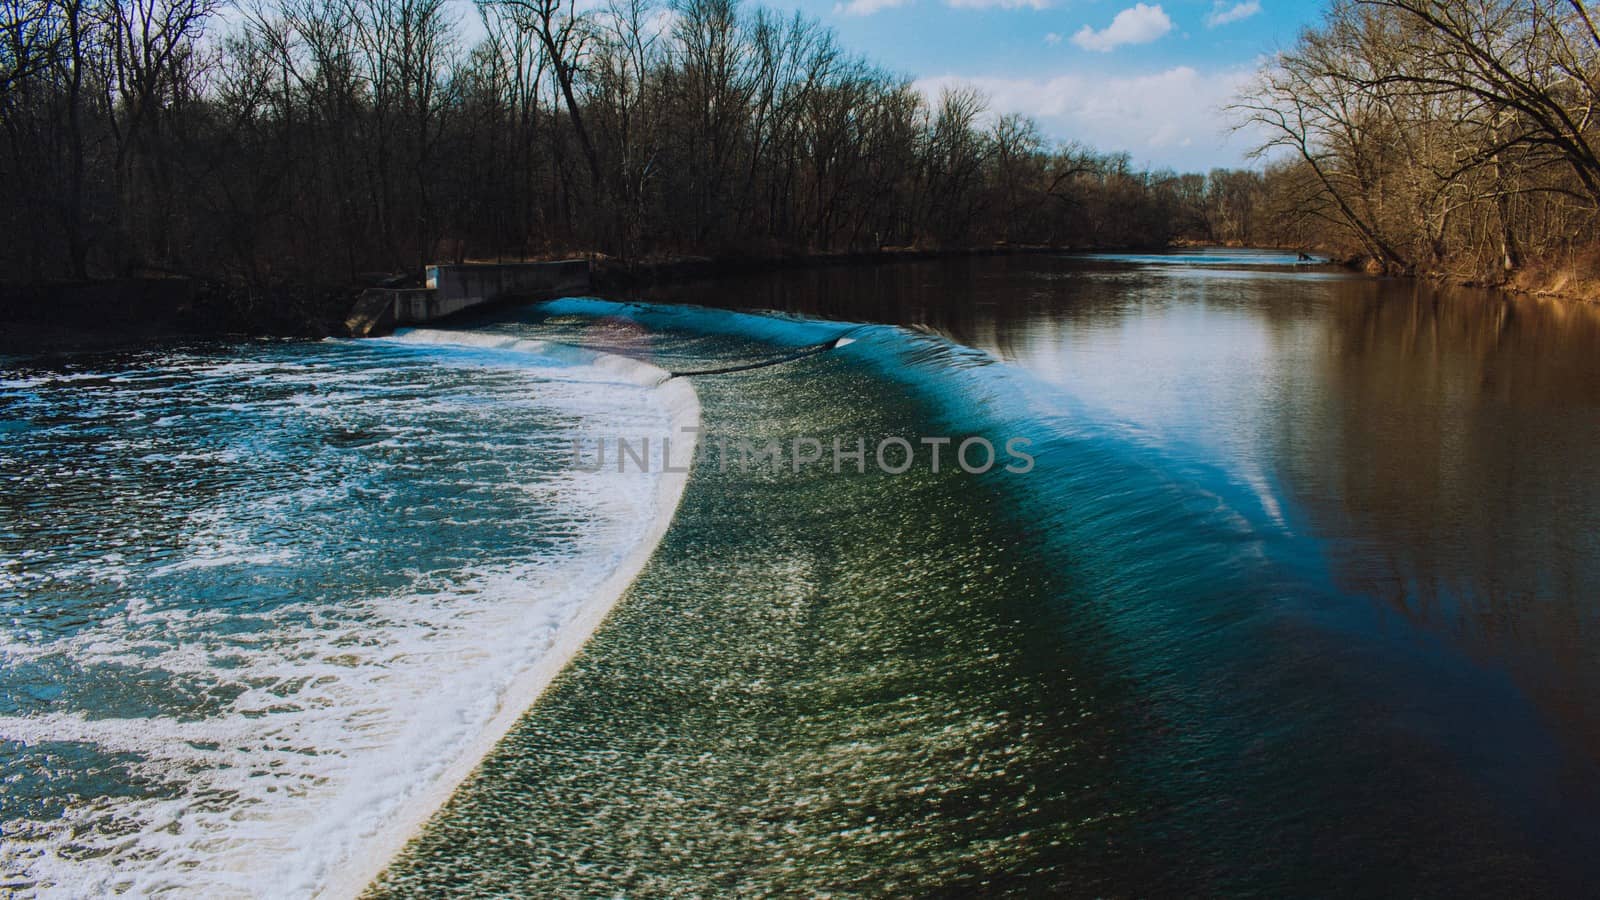 Fast Flowing Water Crashing Over a Man-Made Dam in a Winter Fore by bju12290